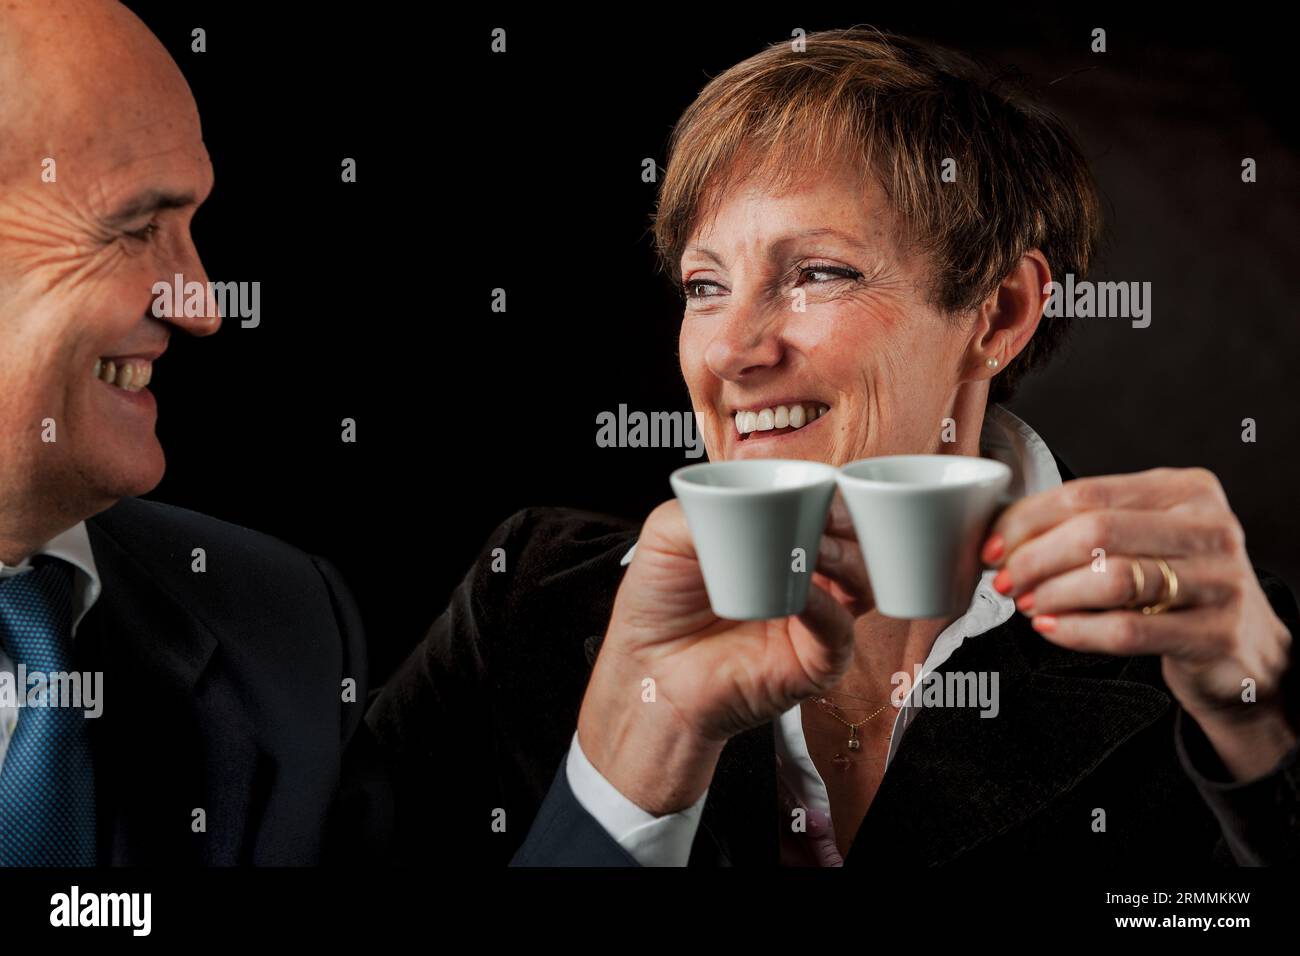 Two elderly well-to-do individuals, enjoying authentic Italian espresso while touring Europe, are portrayed against a black backdrop. The bald gentlem Stock Photo